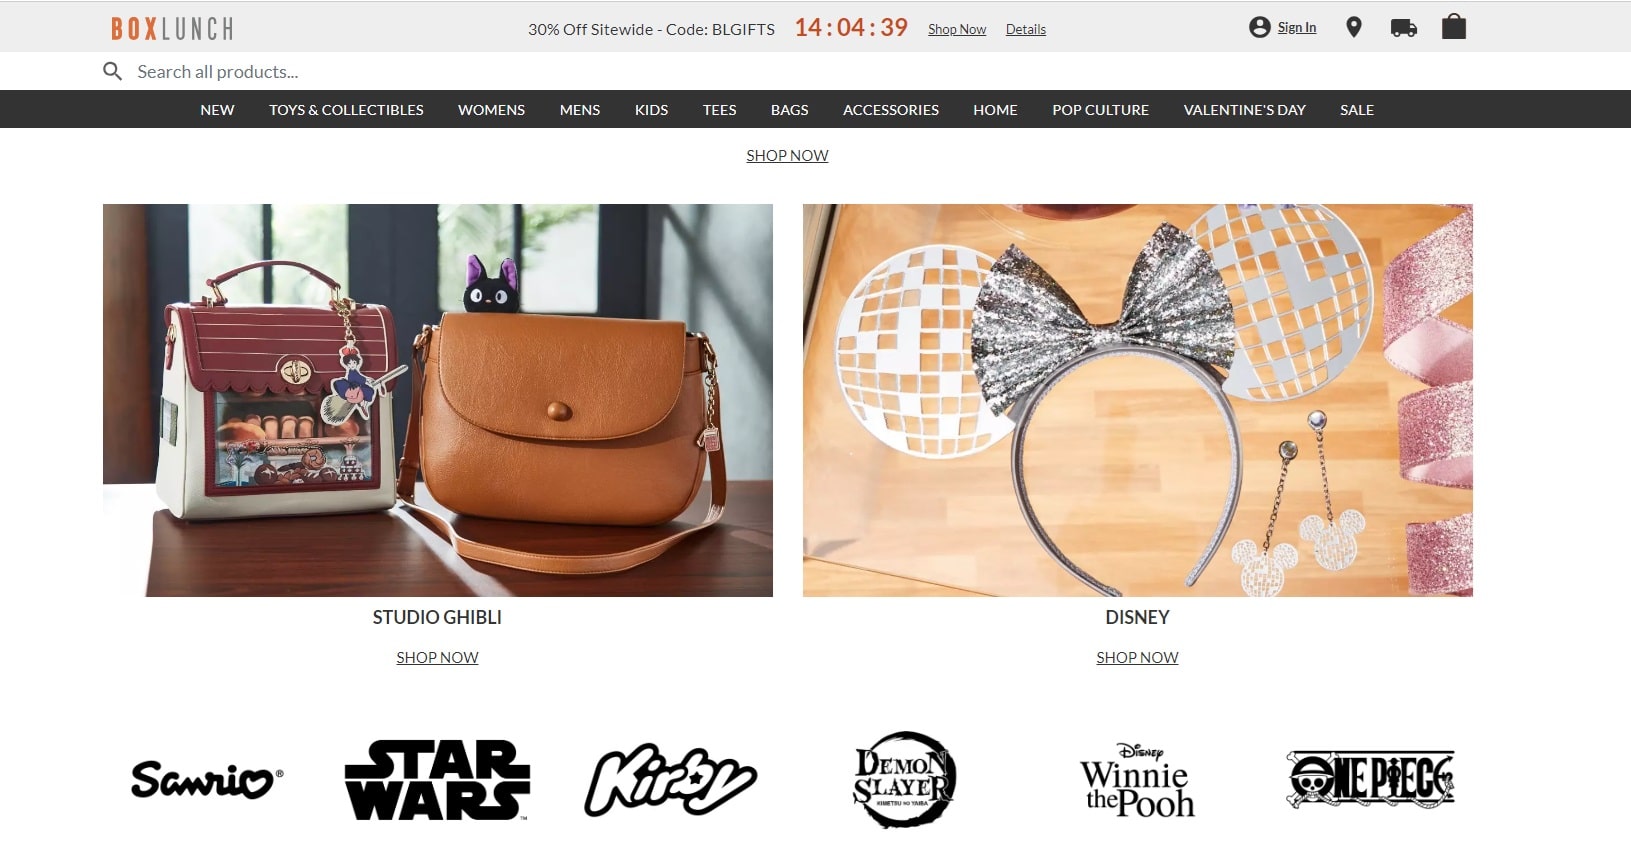 The boxlunch homepage featuring purses and a headband with a bow